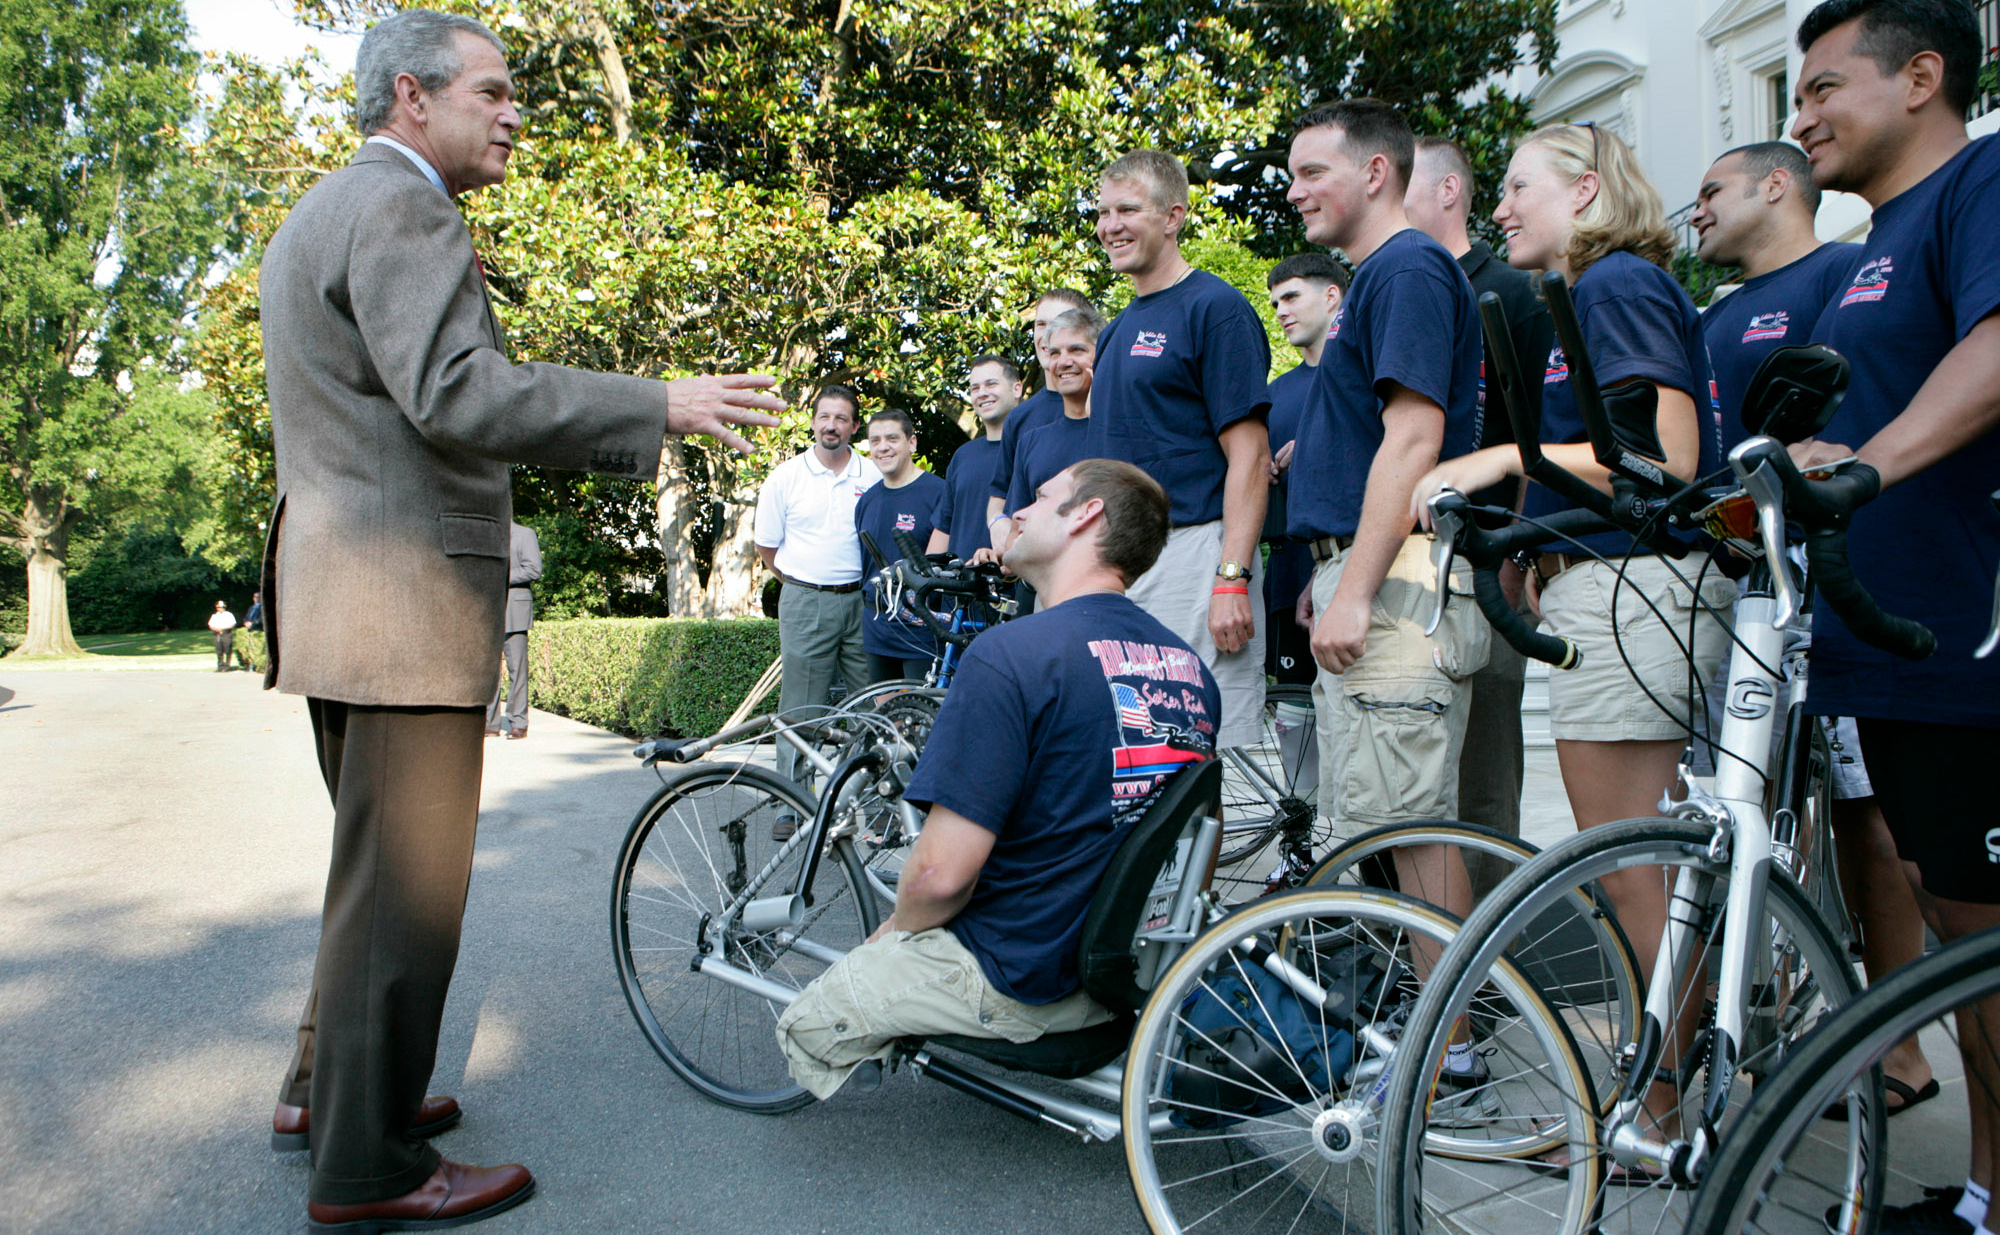 George W. Bush speaks with members of Soldier Ride 2005 National Tour Team. Soldier Ride 2005, comprised of wounded service members, is a 4,200-mile, cross-country bike ride to raise money and support to help prepare wounded soldiers for long-term rehabilitation. (Photo: Eric Draper/White House/ZUMA Press/Newscom)